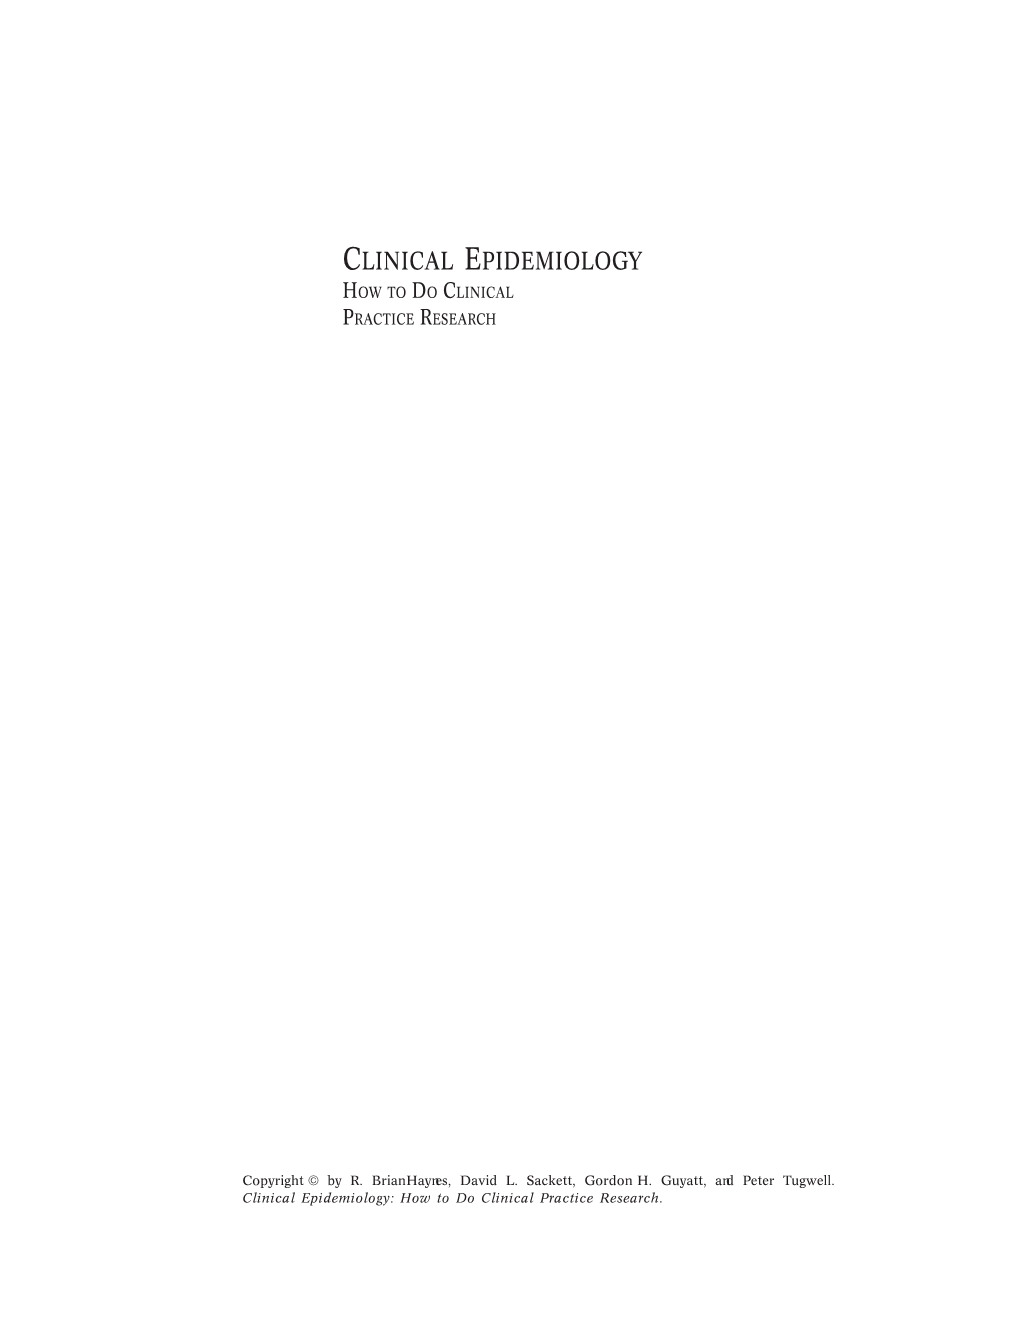 Clinical Epidemiology How to Do Clinical Practice Research